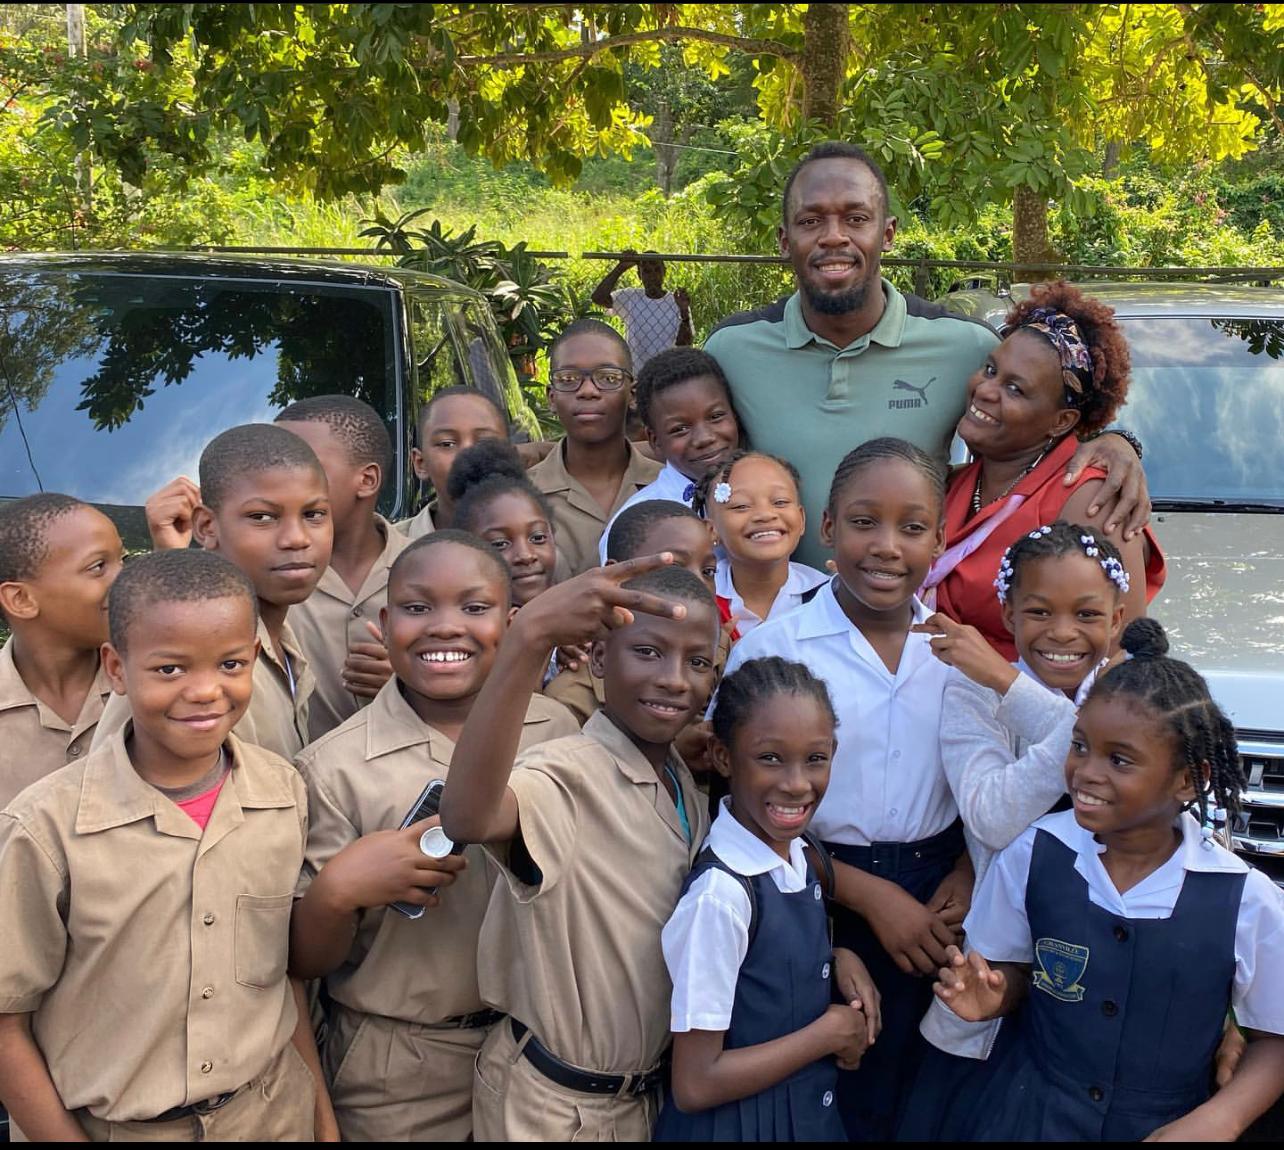 Usain Bolt Foundation Makes Donation of Laptop Computers to Rural Schools in Jamaica